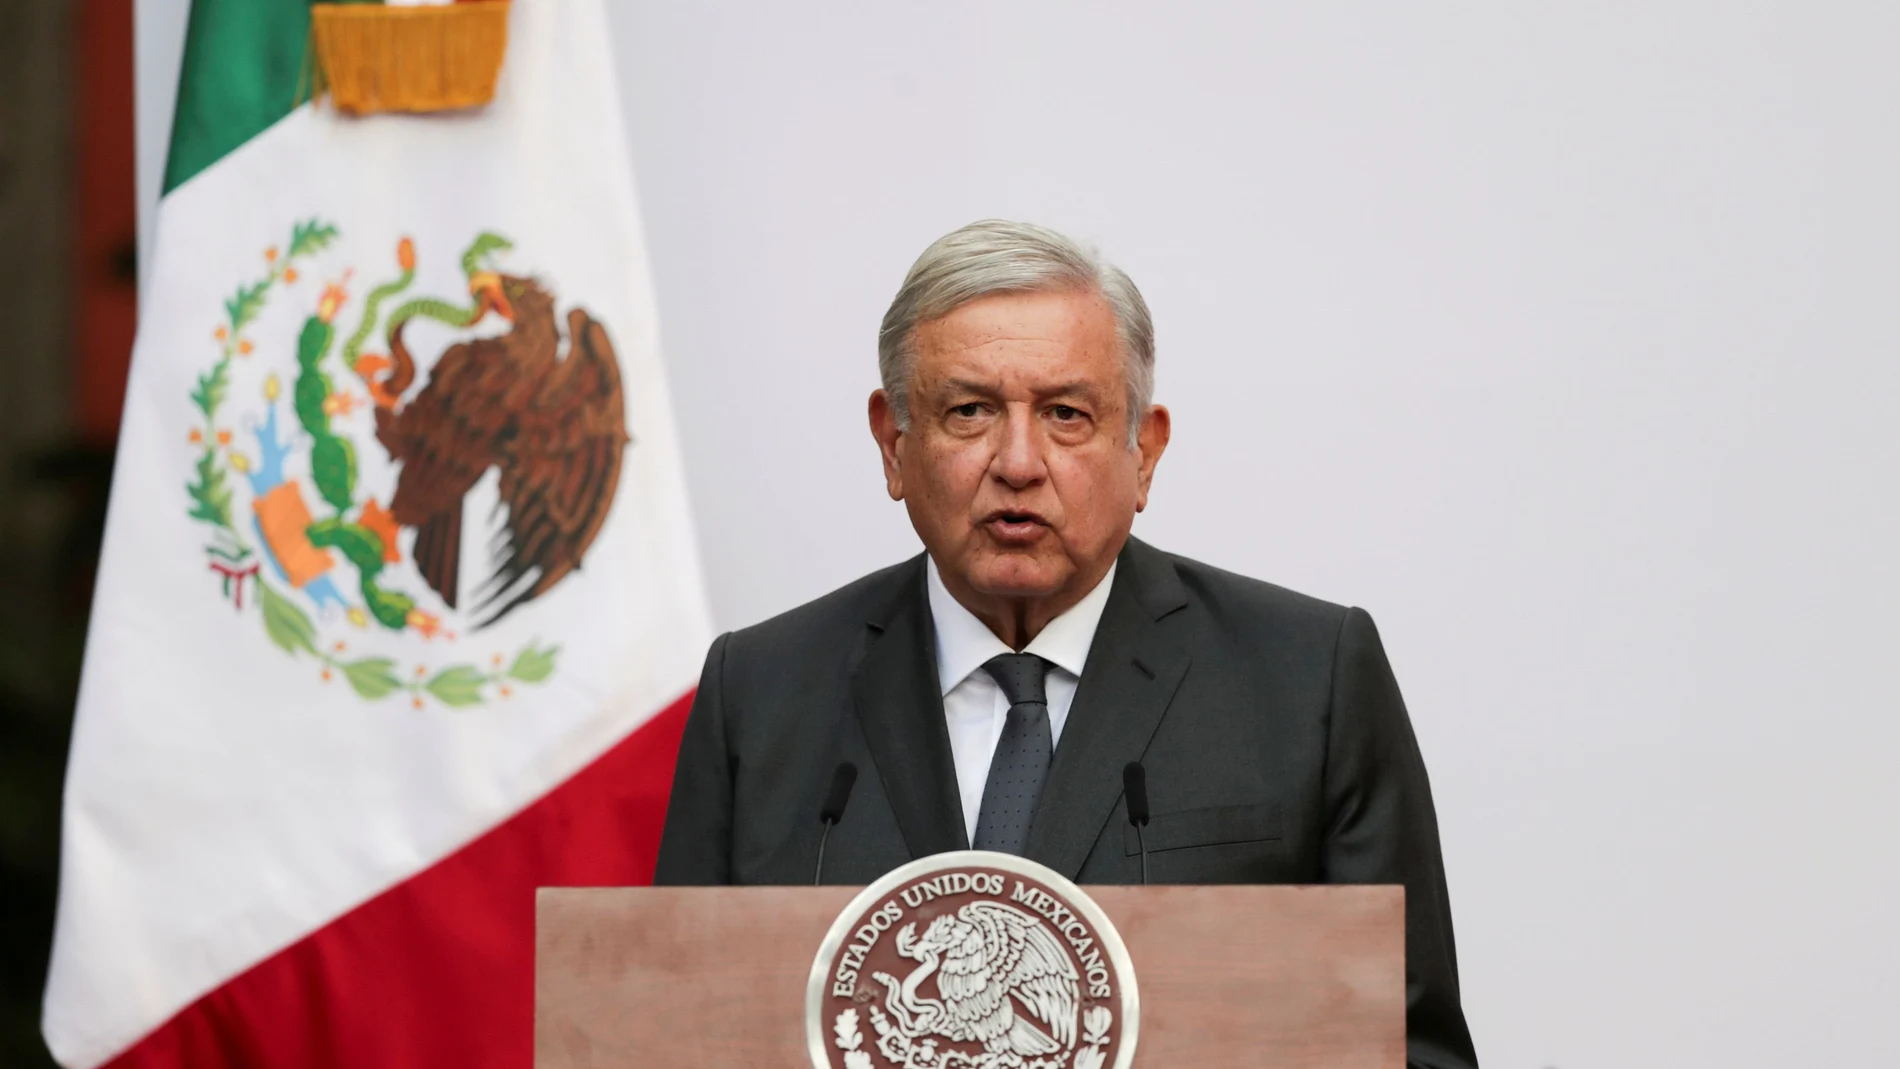 FILE PHOTO: Mexico's President Andres Manuel Lopez Obrador addresses to the nation on his second anniversary as the President of Mexico, at the National Palace in Mexico City, Mexico, December 1, 2020. REUTERS/Henry Romero/File Photo